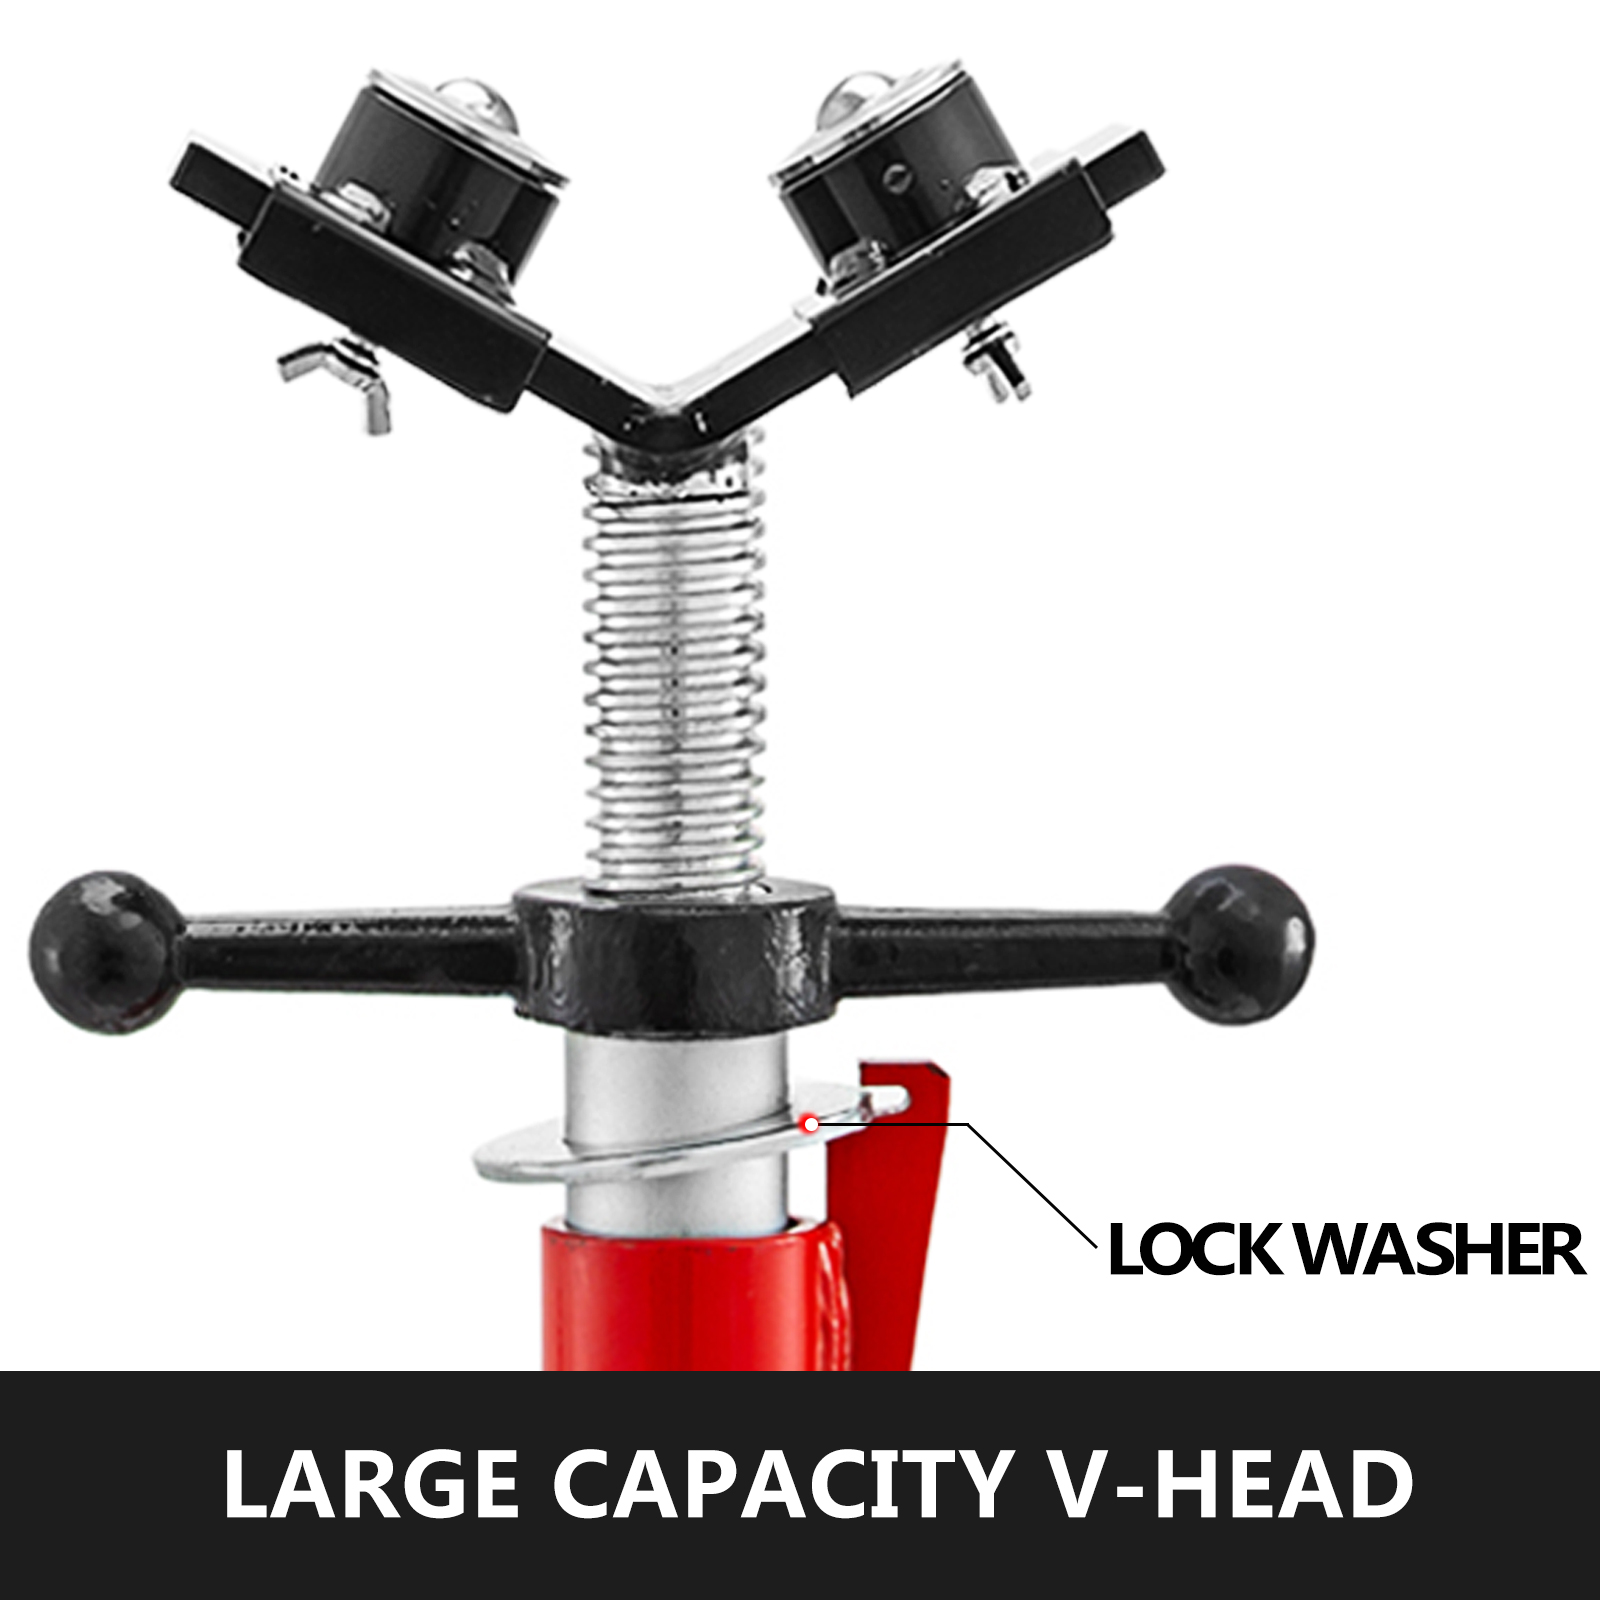 Fold-a-Jack V-Head Pipe Stand 23.6/"-42.5/"//60-108 cm With 2-Ball Transfer RIDGID